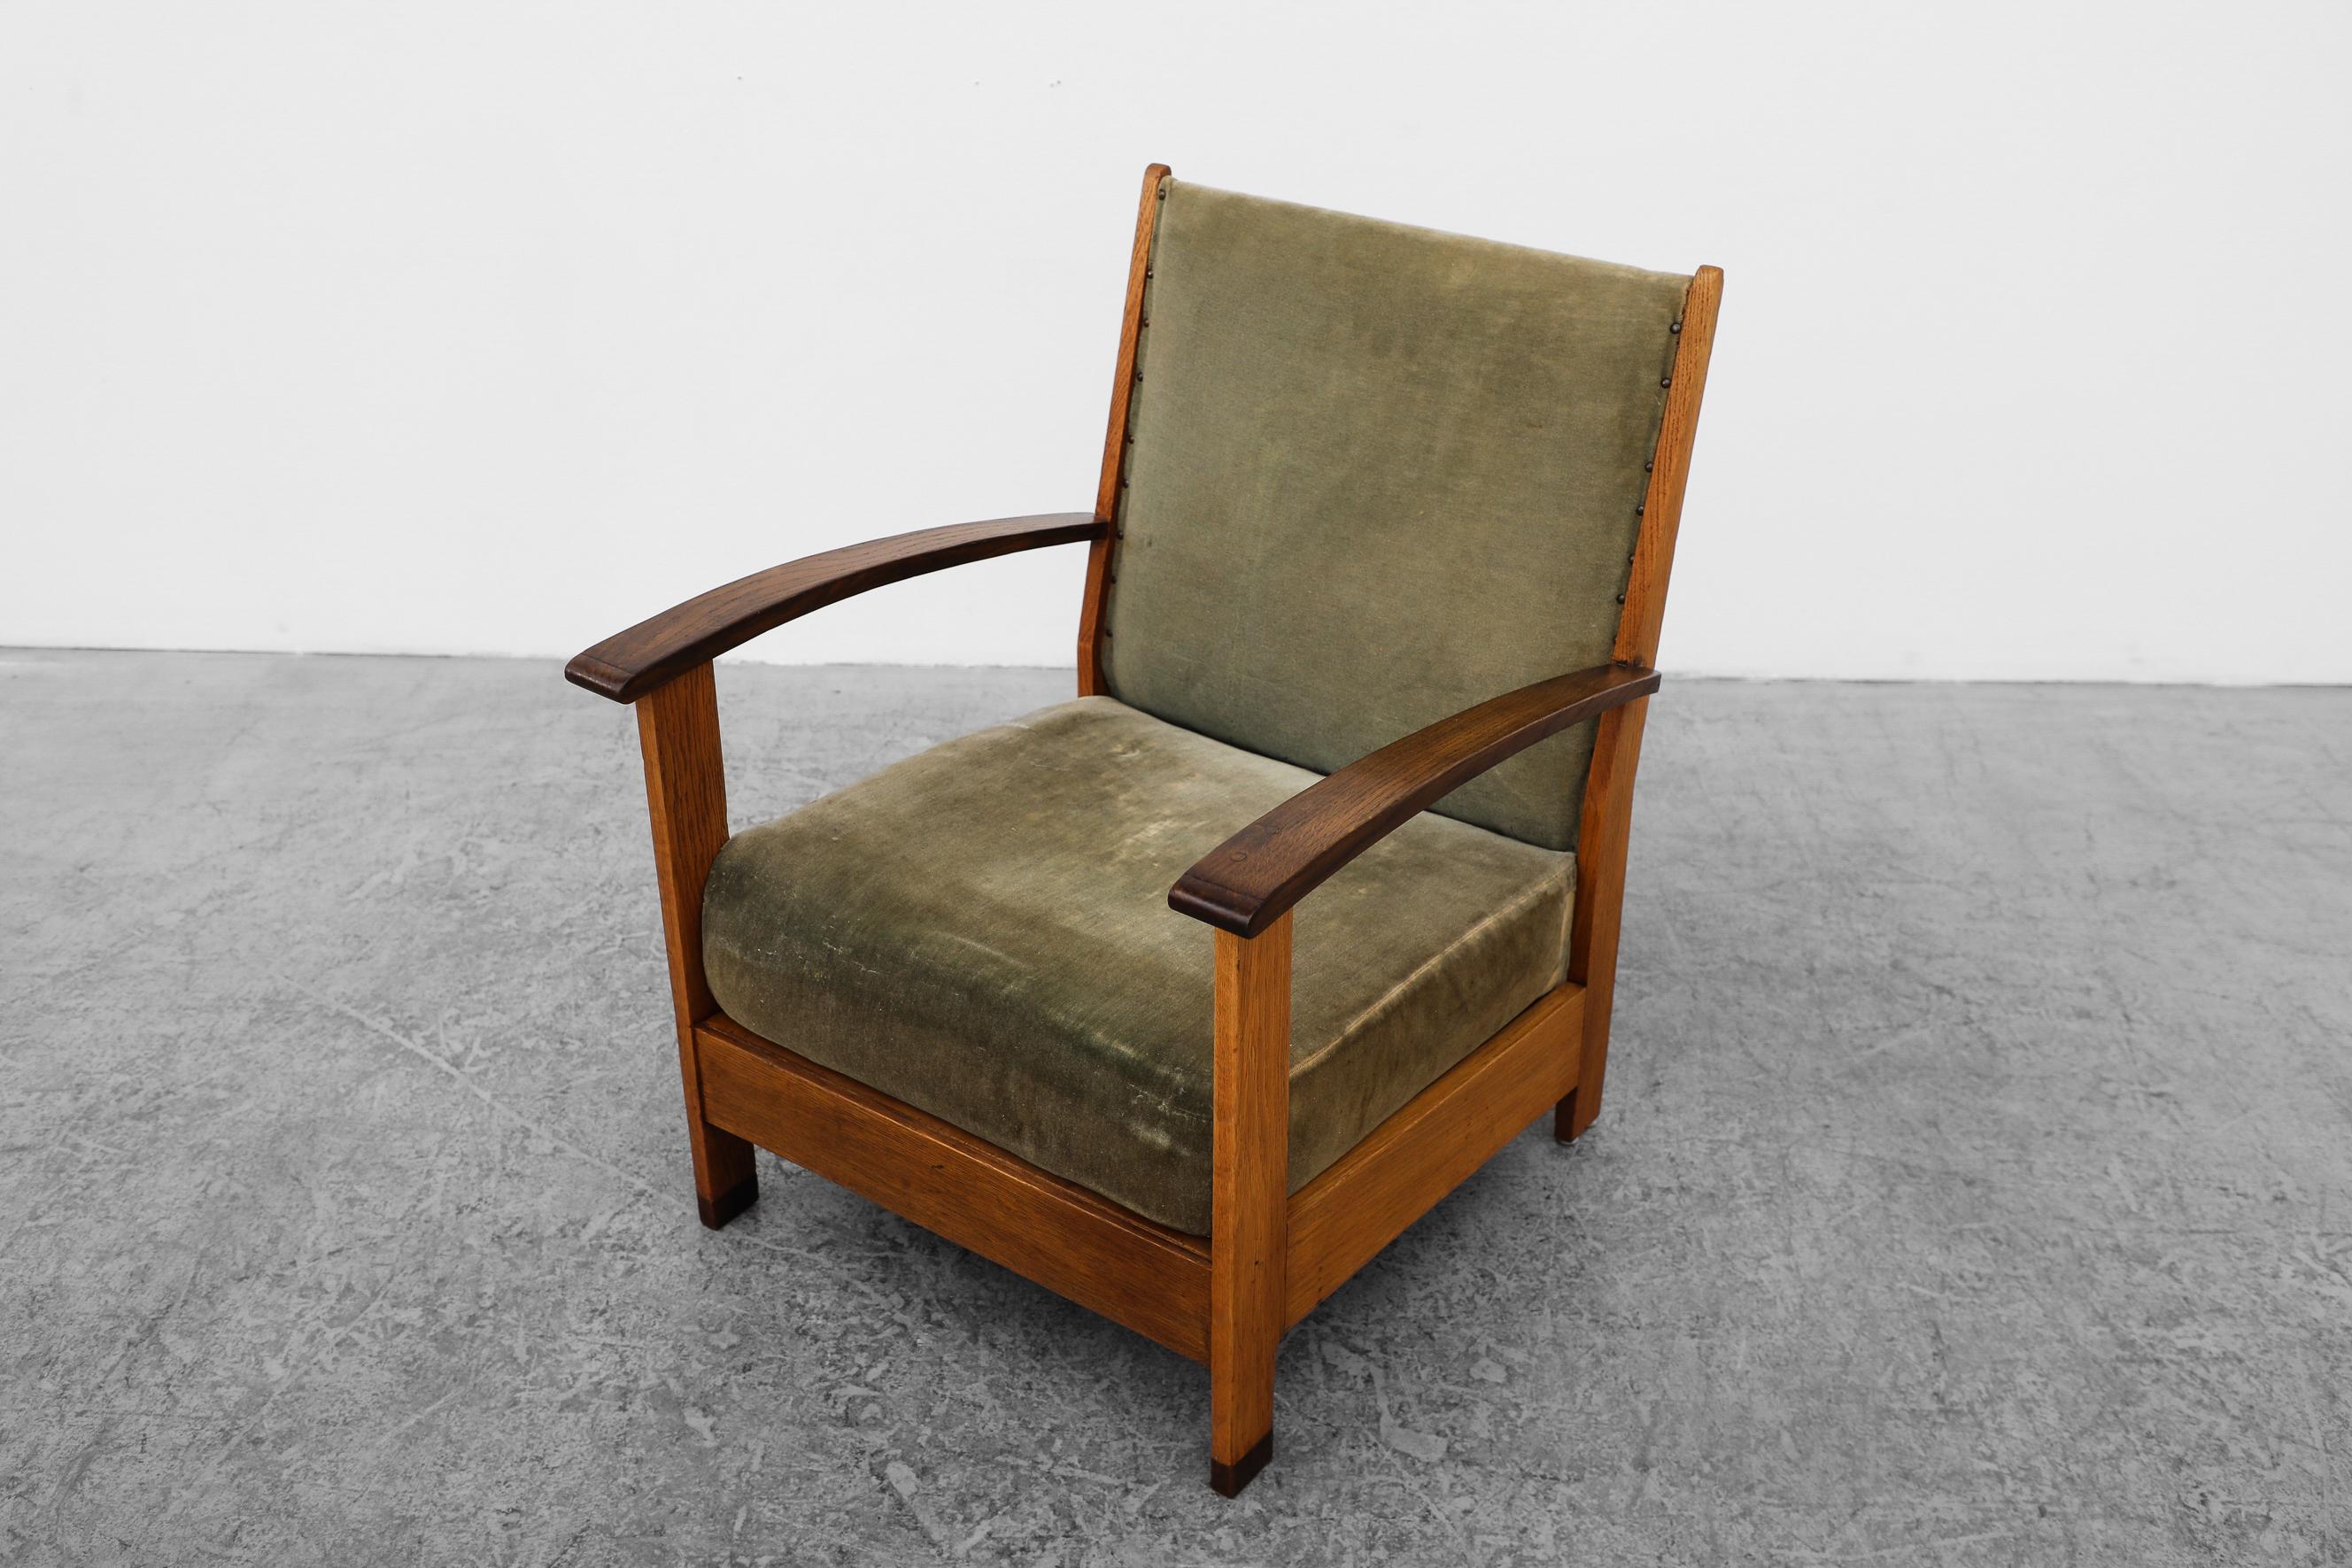 Original Dutch Art Deco Oak Lounge Chair w/ Curved Armrests & Green Upholstery For Sale 4